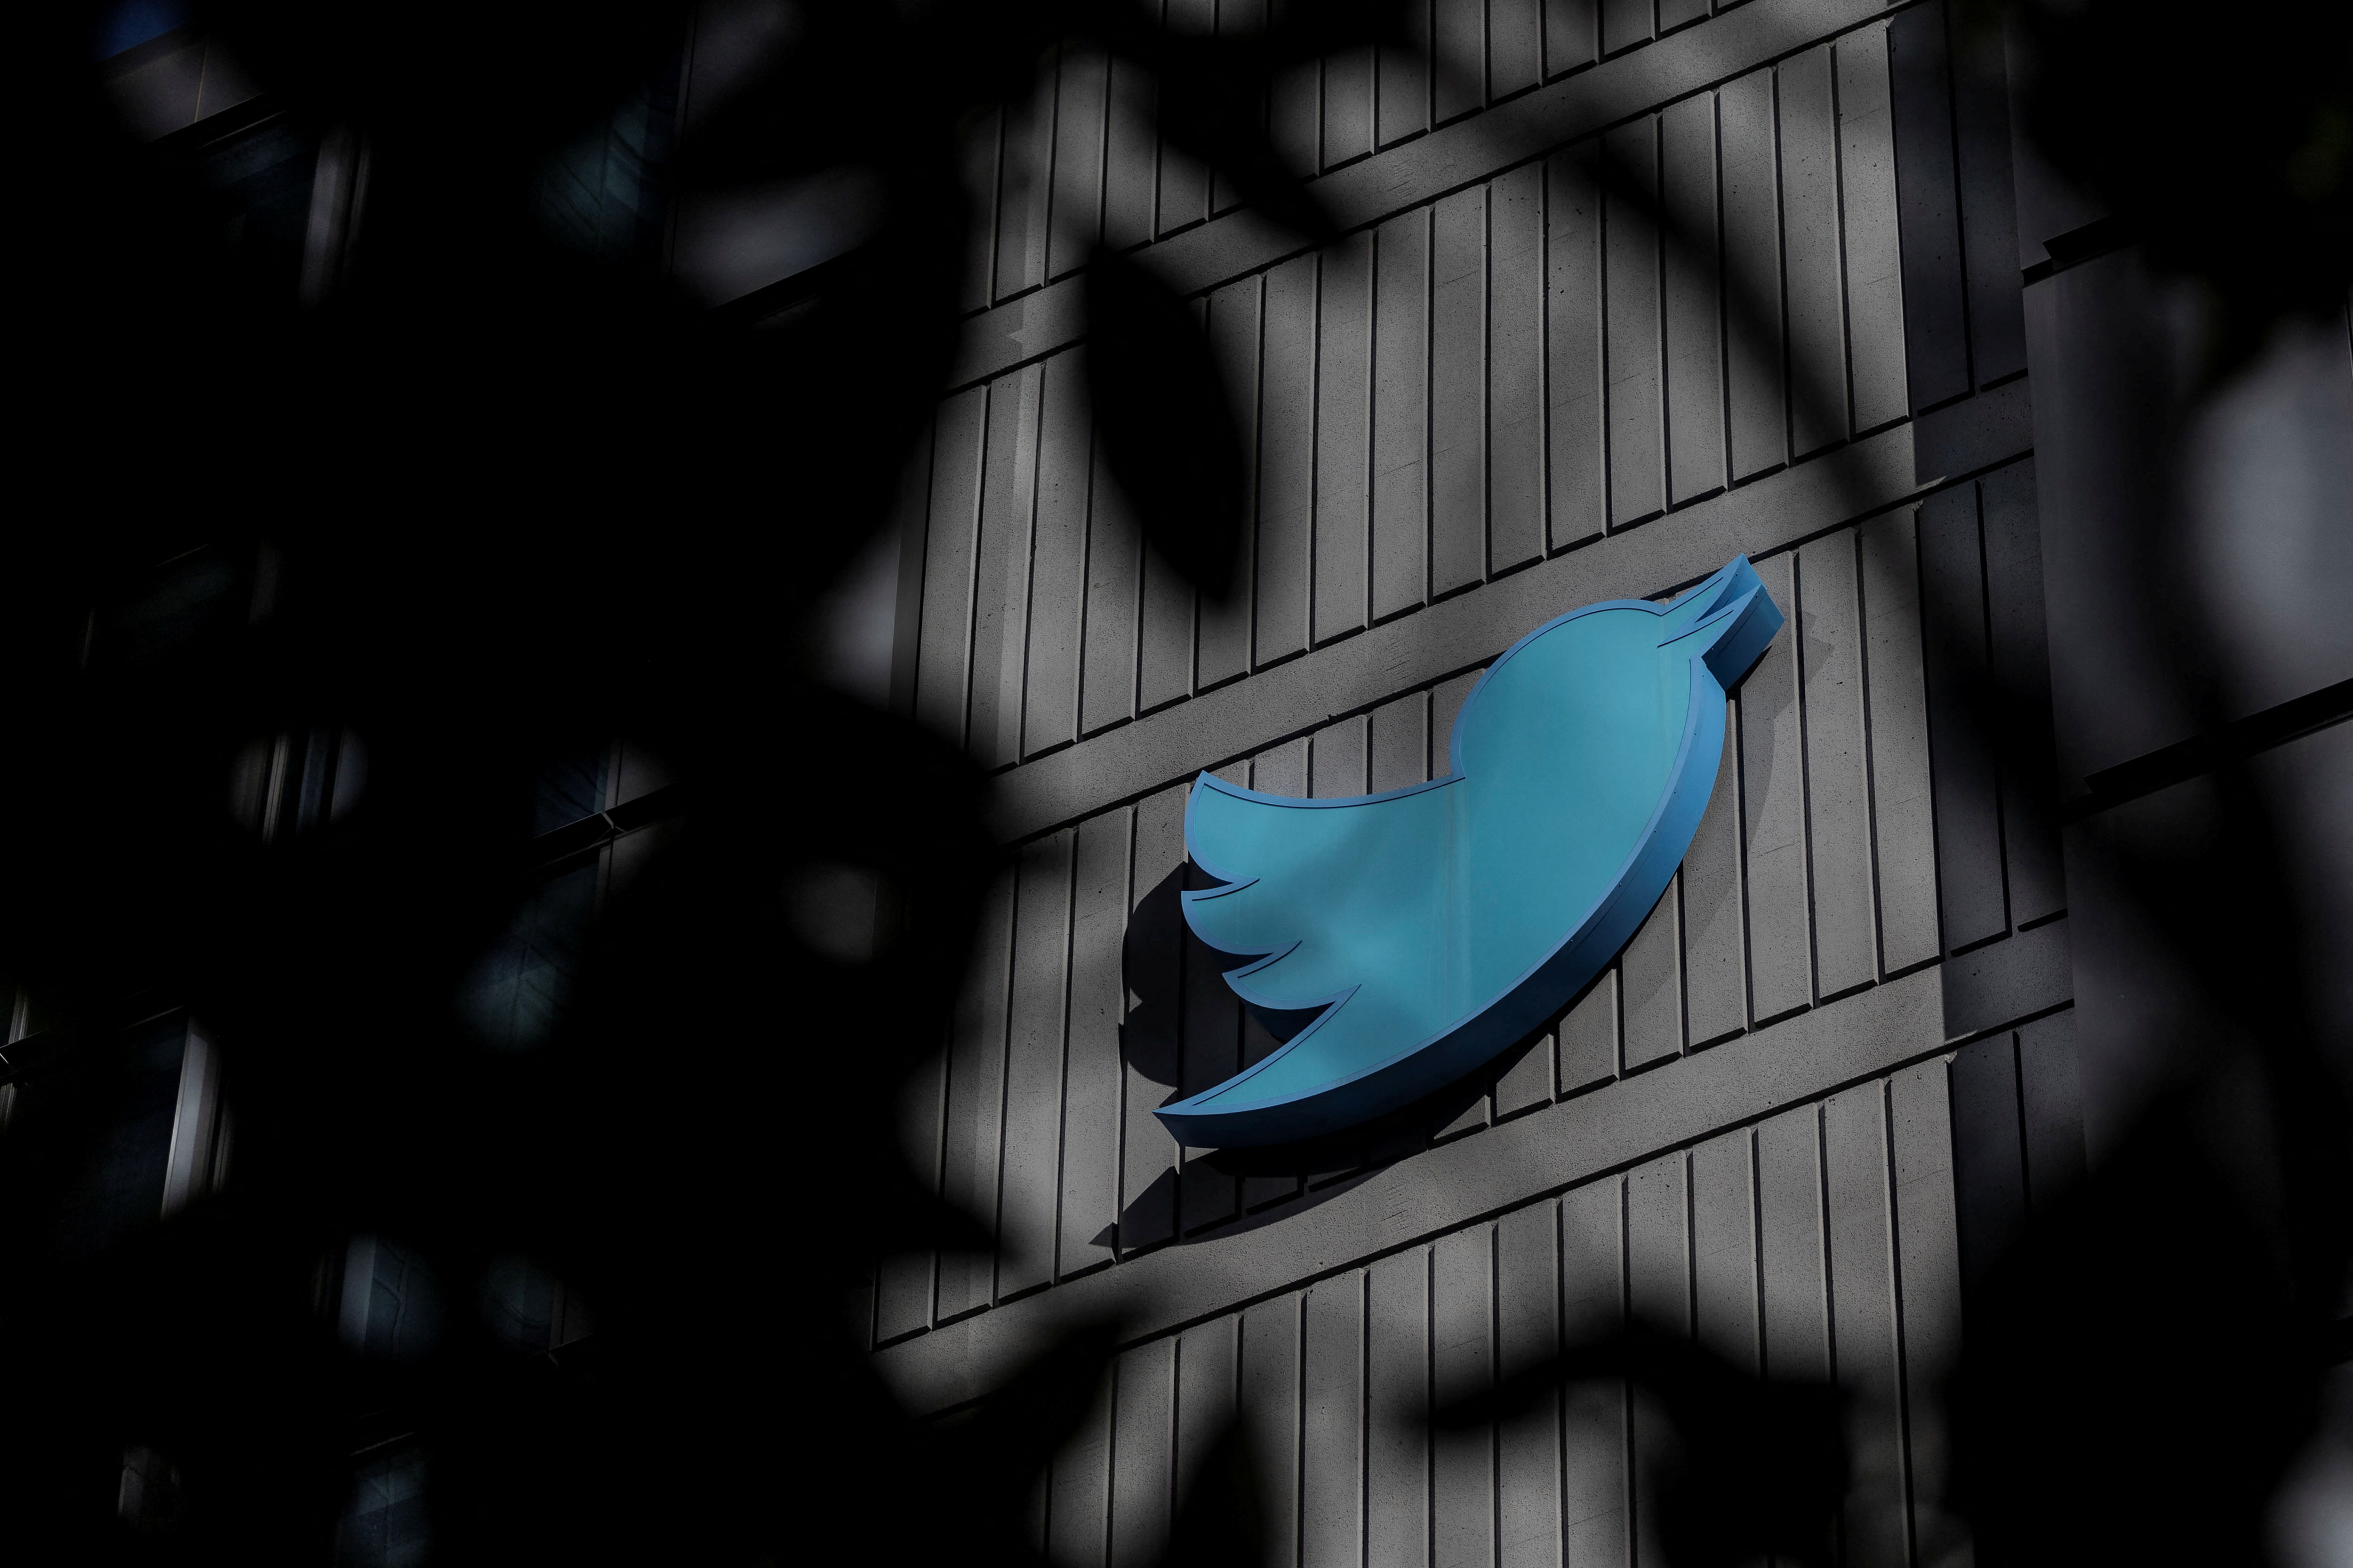 Twitter sued for non-payment of office rent in San Francisco